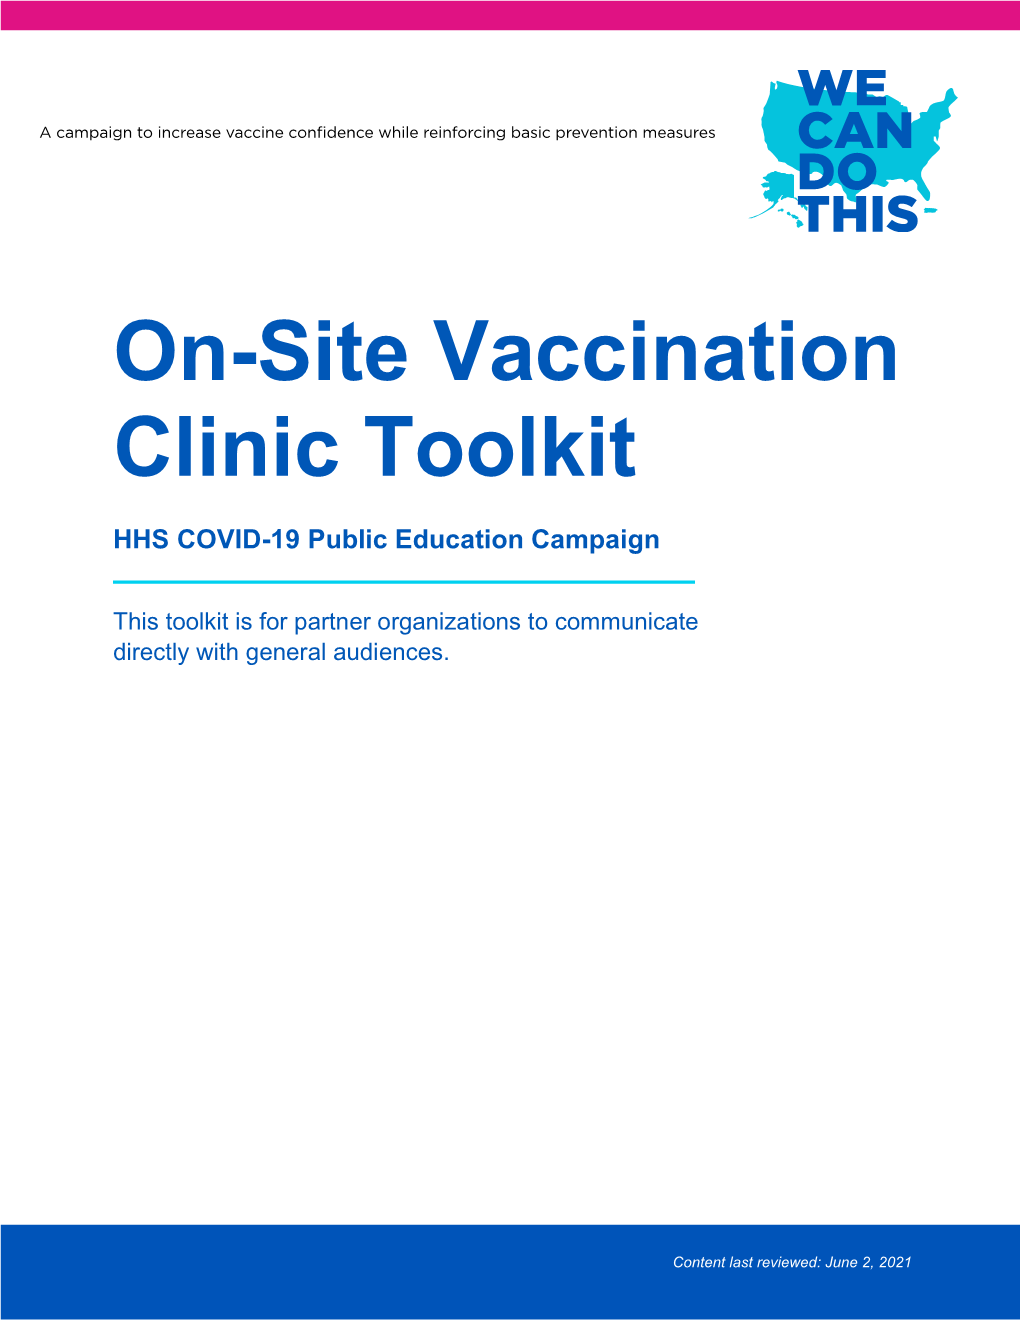 On-Site Vaccination Clinic Toolkit